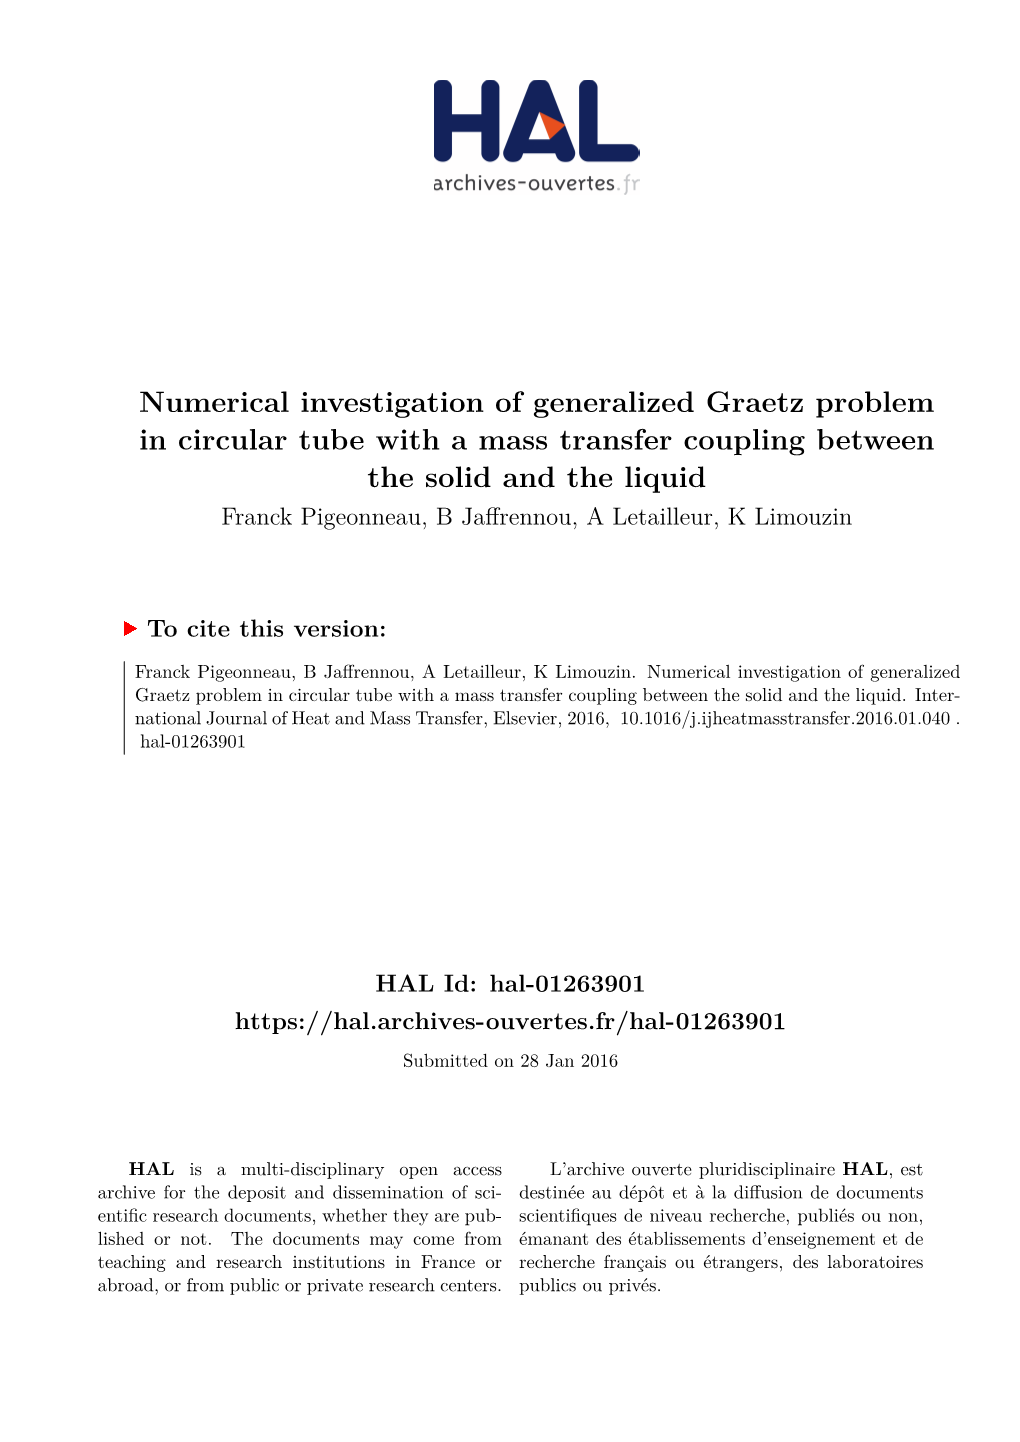 Numerical Investigation of Generalized Graetz Problem in Circular Tube with a Mass Transfer Coupling Between the Solid and the L